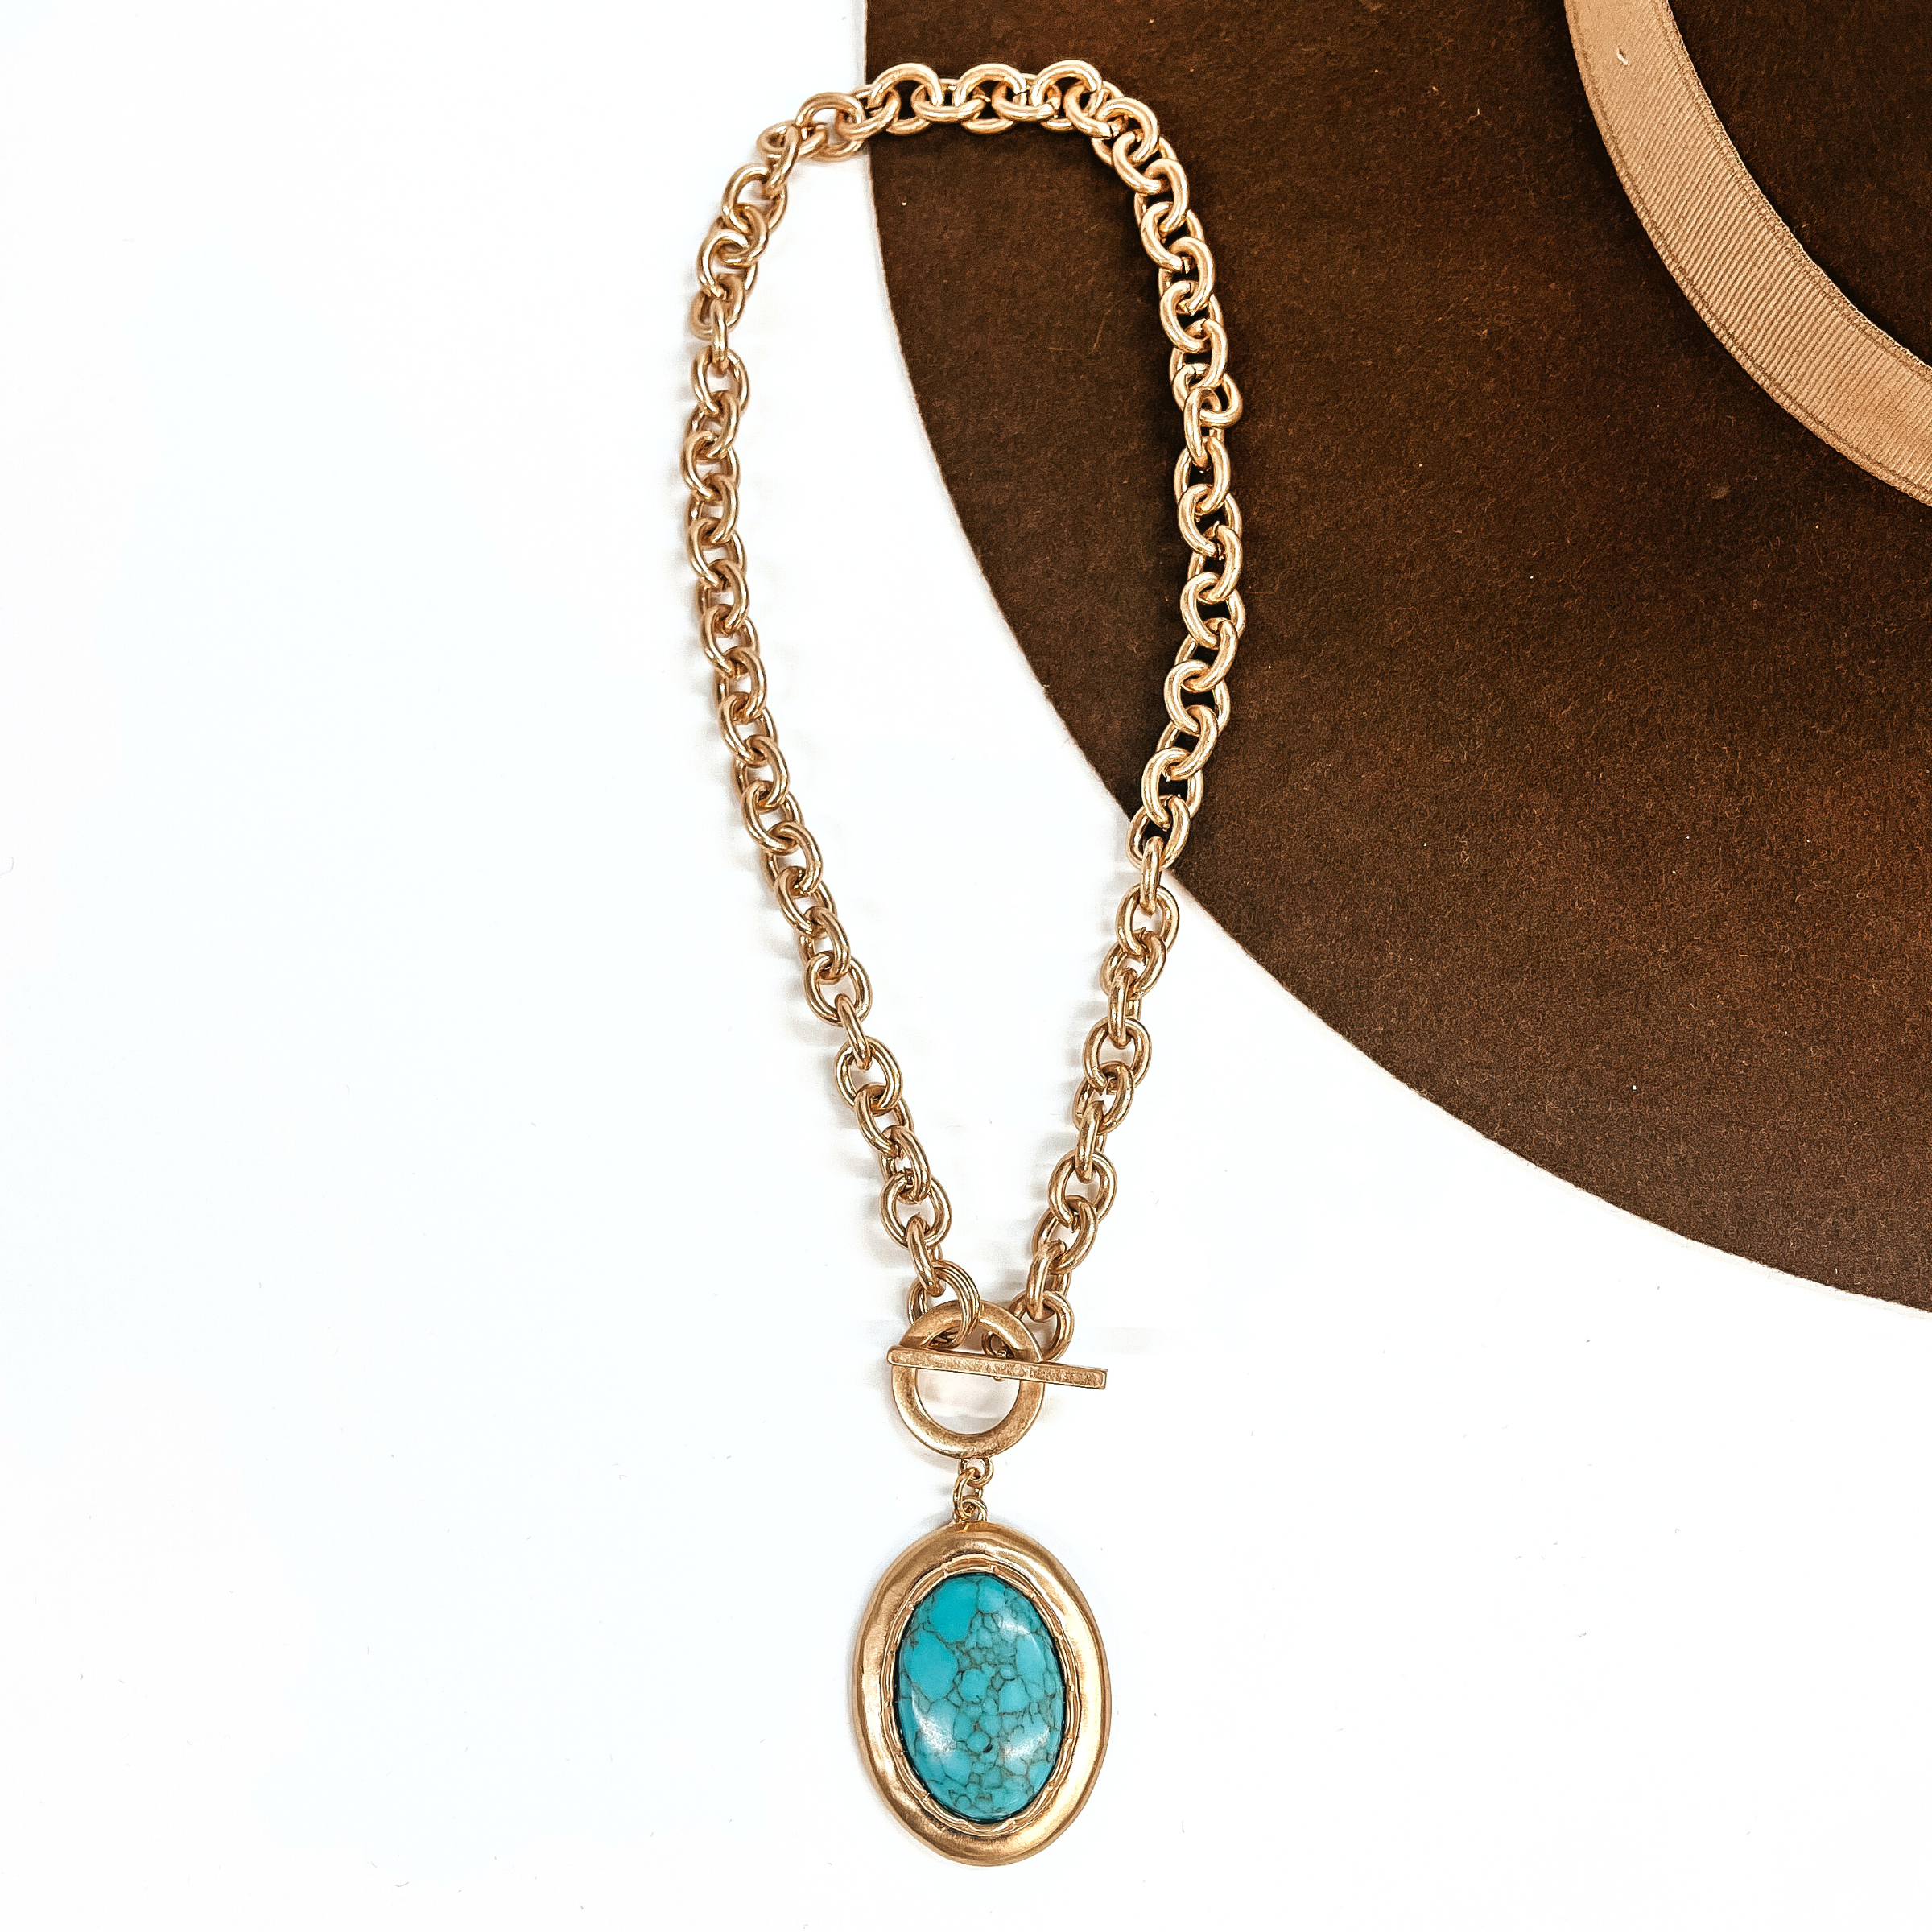 This is a matte gold tone, thick link chain necklace with a front toggle clasp. There is  an oval pendant drop, a turquoise stone in a gold setting. This necklace is taken on a white background and on a dark brown felt hat brim.